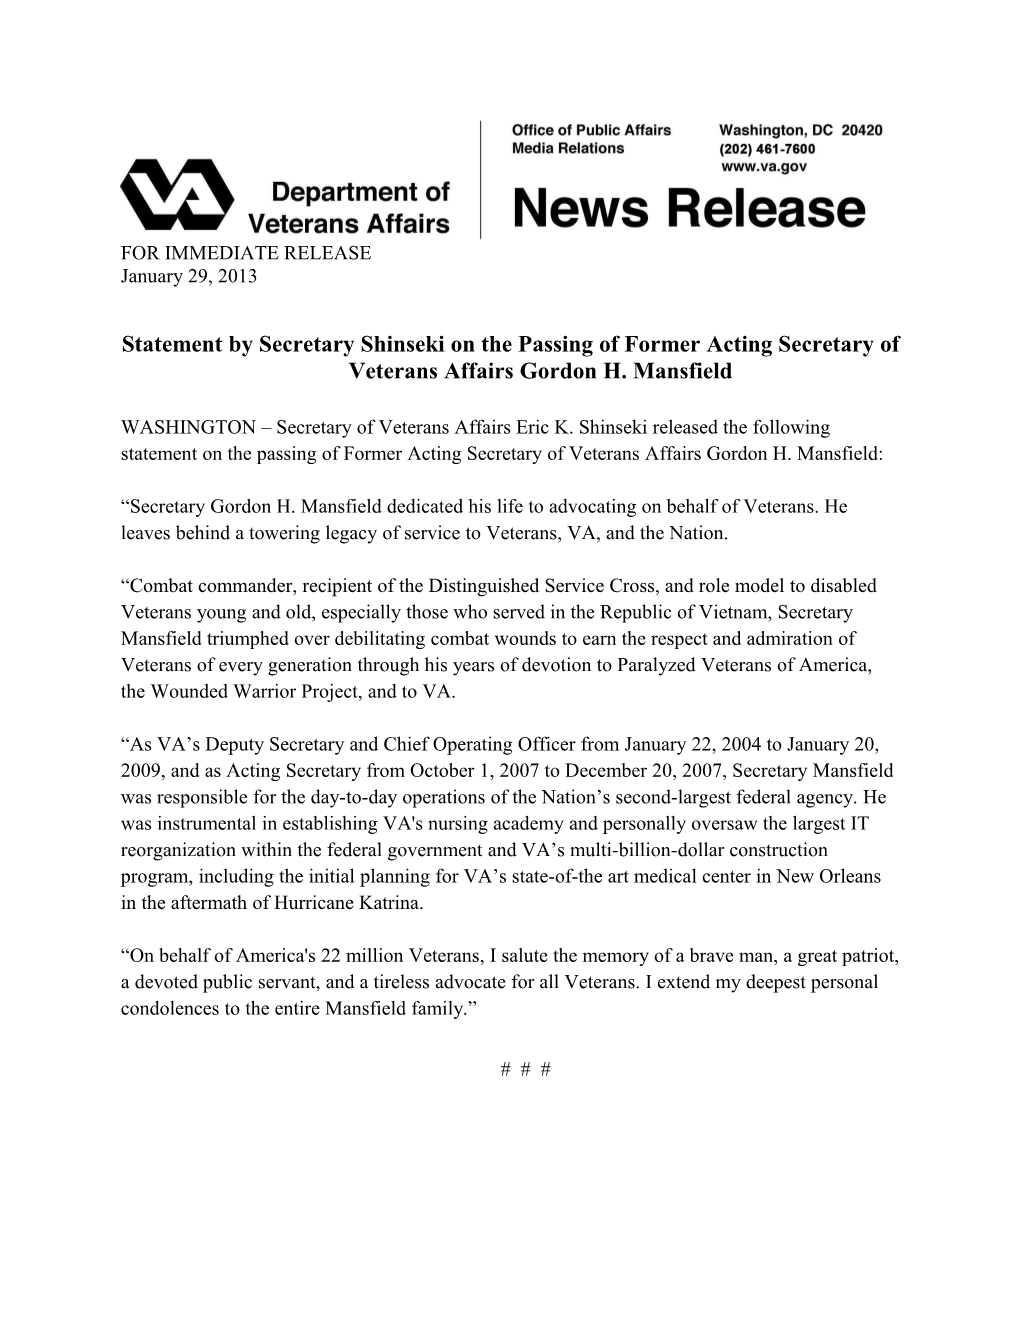 Statement by Secretary Shinseki on the Passing of Former Acting Secretary of Veterans Affairs